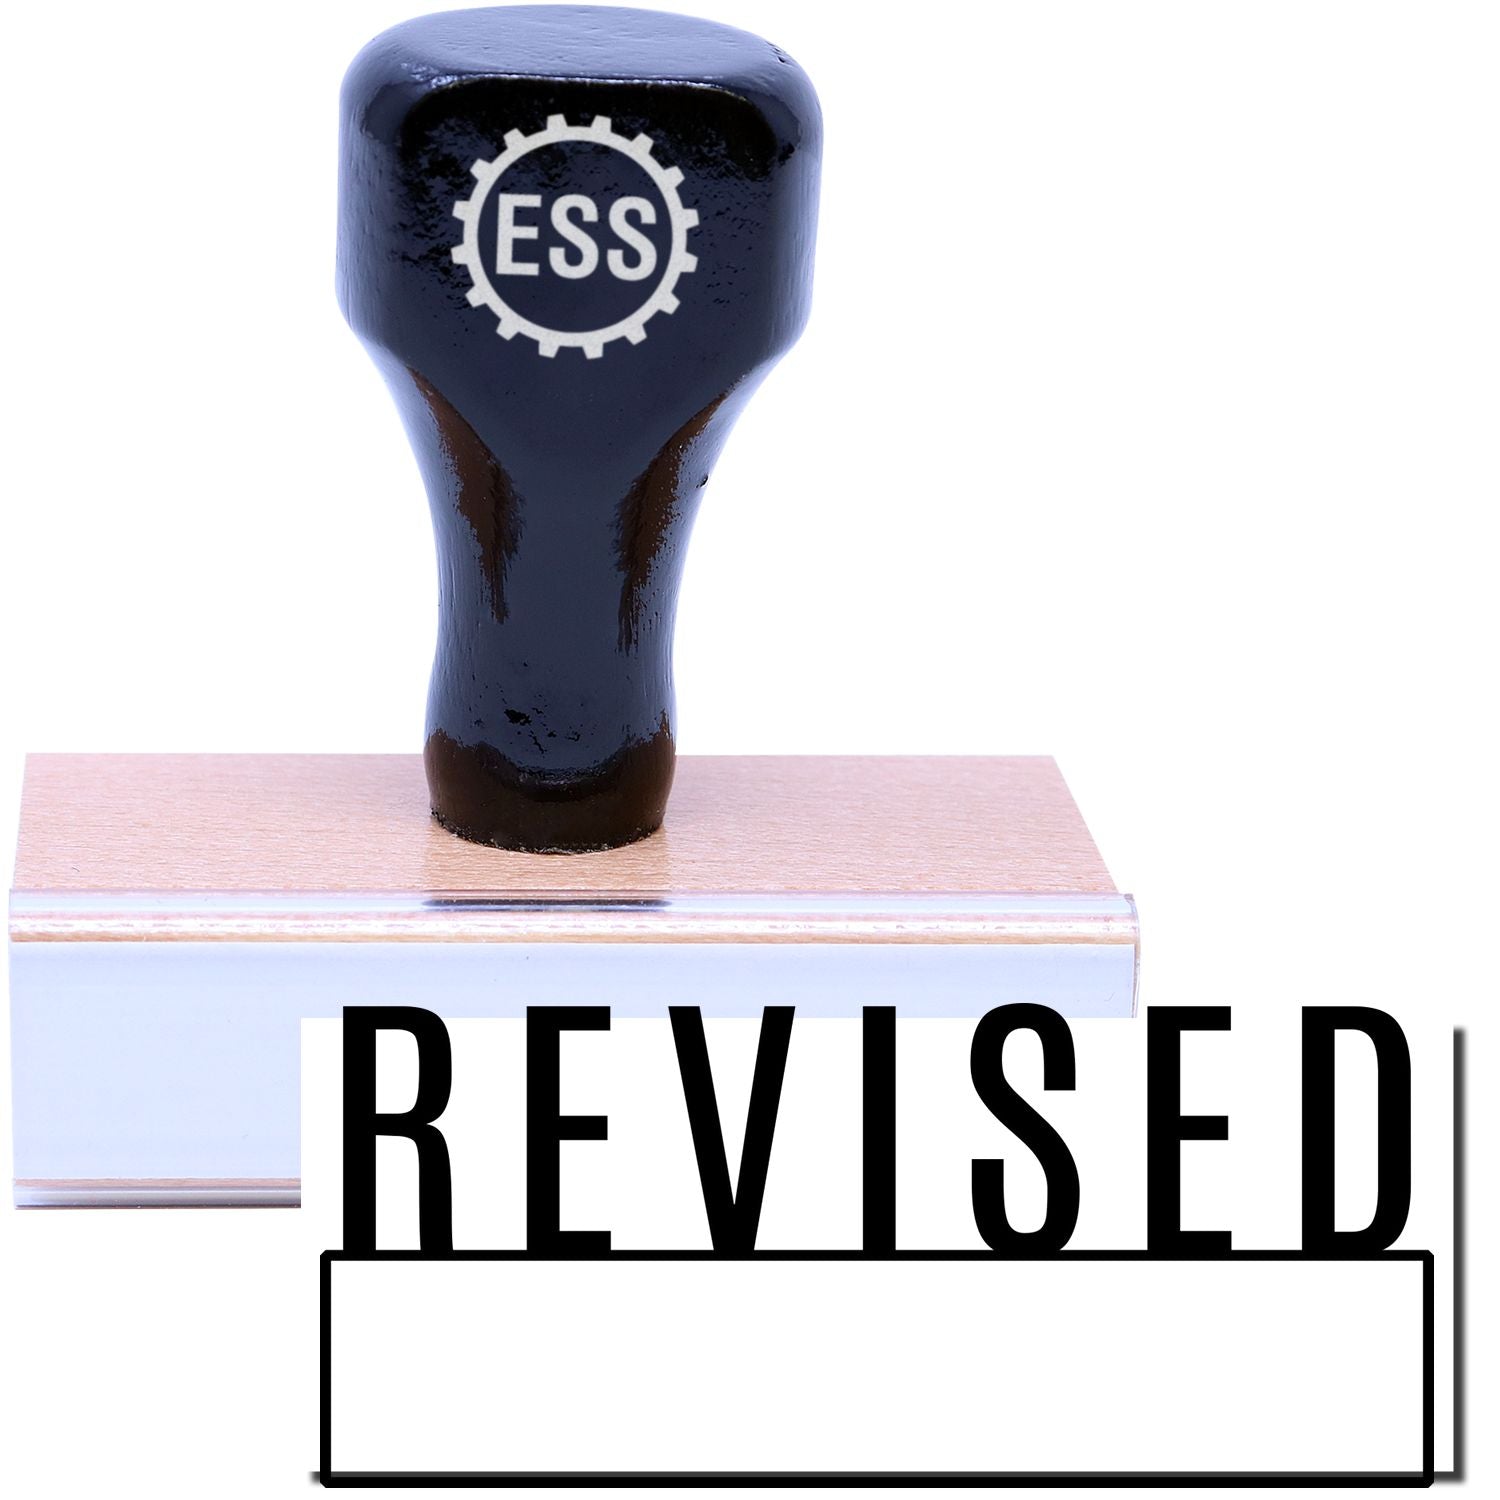 A stock office rubber stamp with a stamped image showing how the text "REVISED" with a box under it is displayed after stamping.